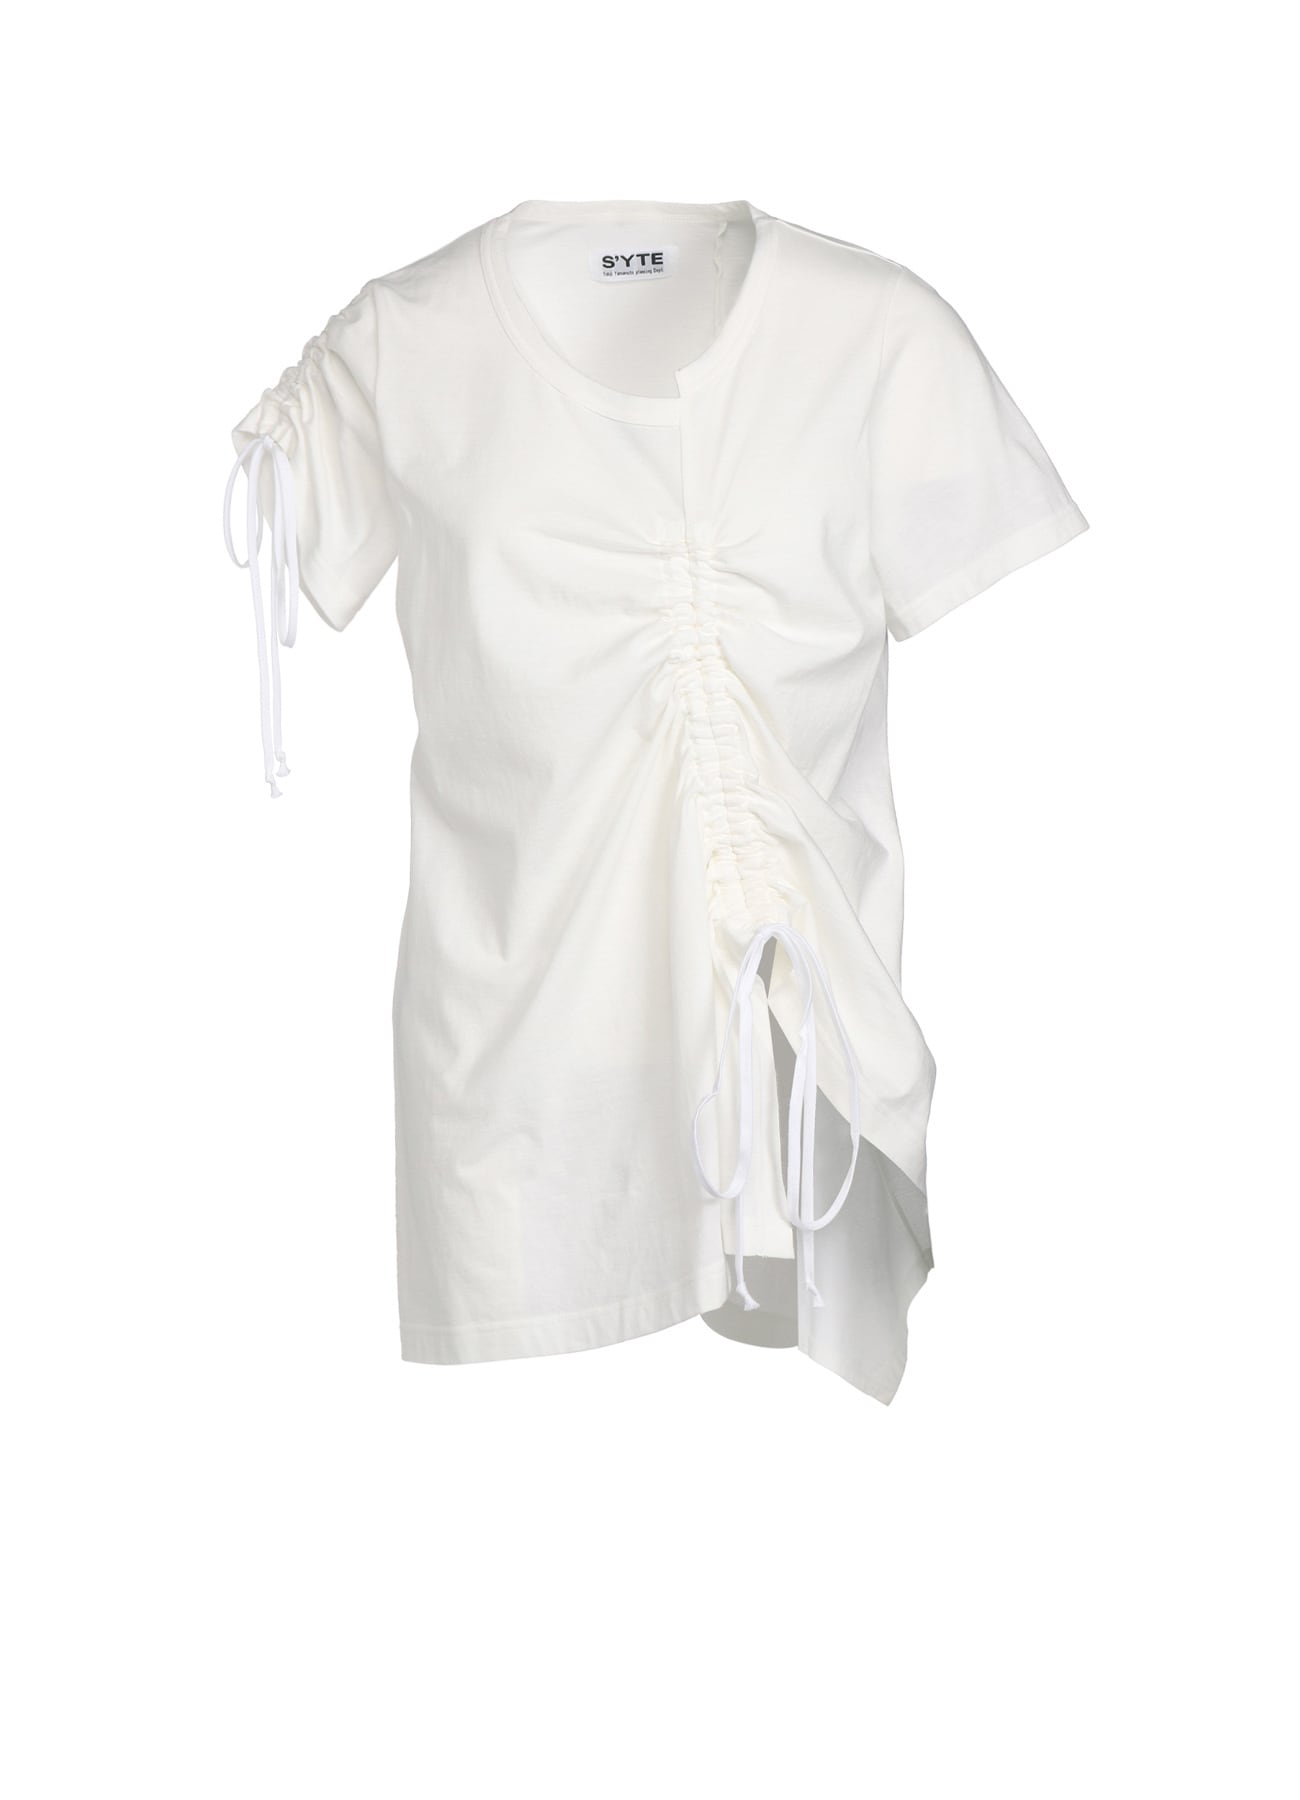 COTTON JERSEY ASYMMETRICAL T-SHIRT WITH GATHERED STRINGS